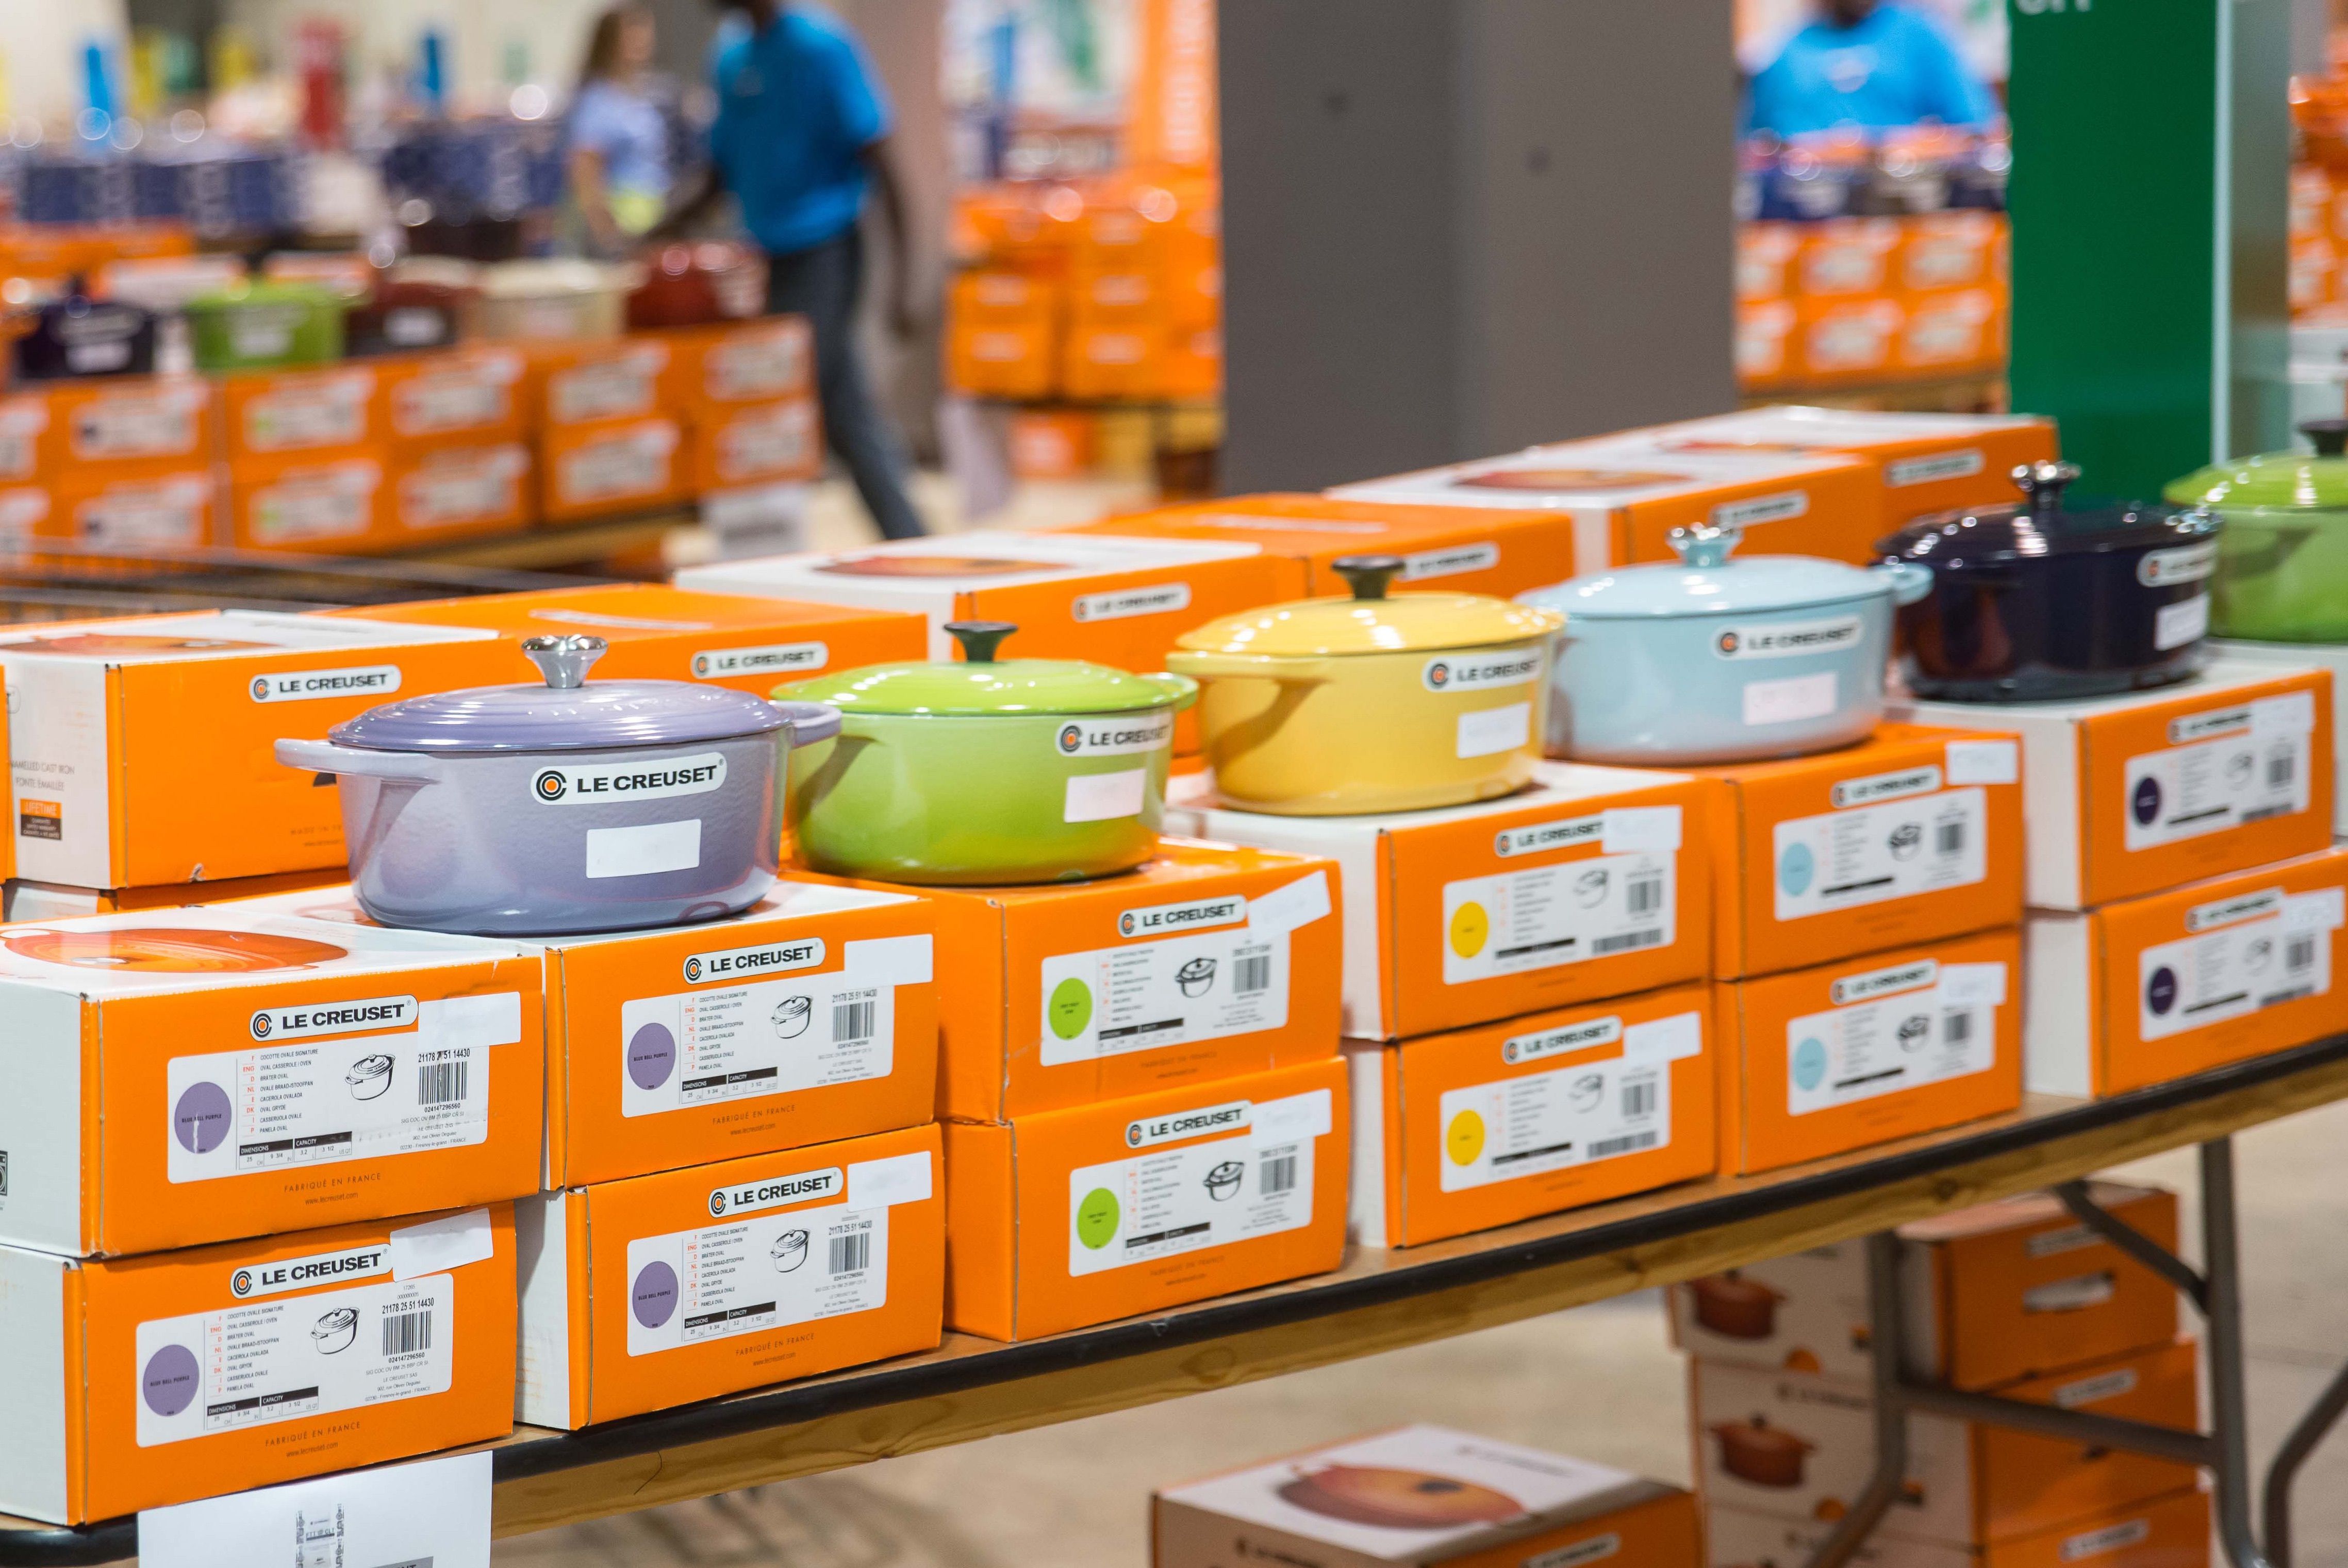 Le Creuset Factory to Table Sale 2021